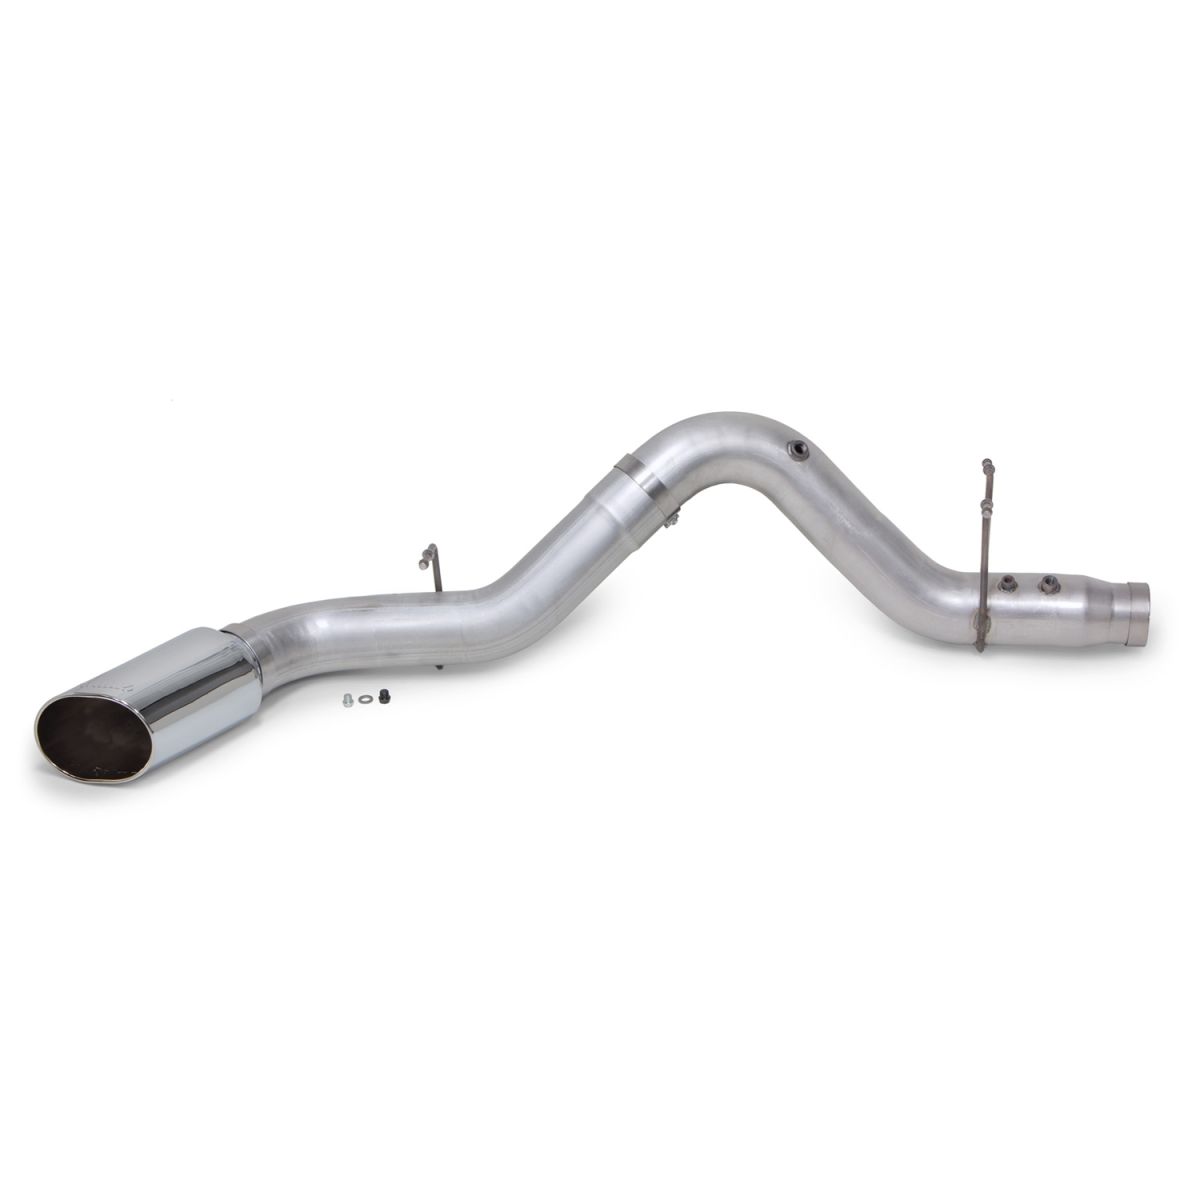 Banks Power - Banks Power Monster Exhaust System 5-inch Single Exit Chrome Tip 2017-2019 Chevy/GMC 2500/3500 Duramax 6.6L L5P